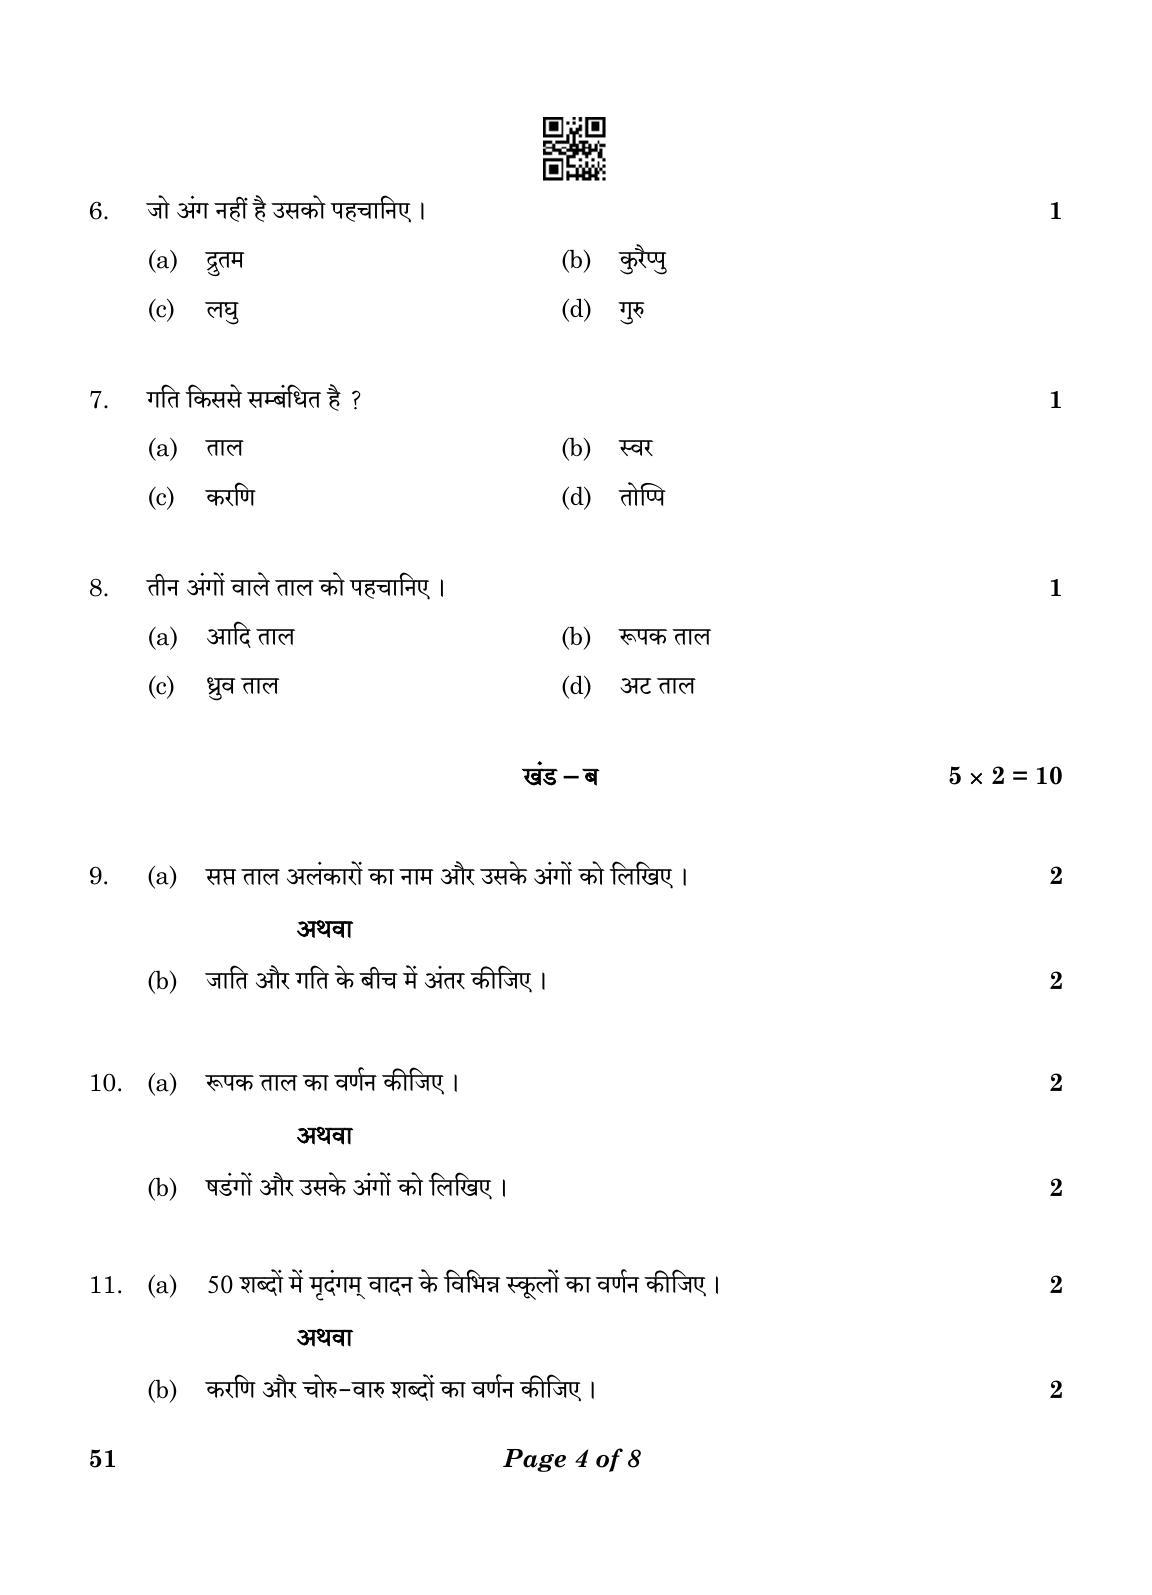 CBSE Class 10 51 CARNATIC MUSIC (Percussion Instruments) 2023 Question Paper - Page 4